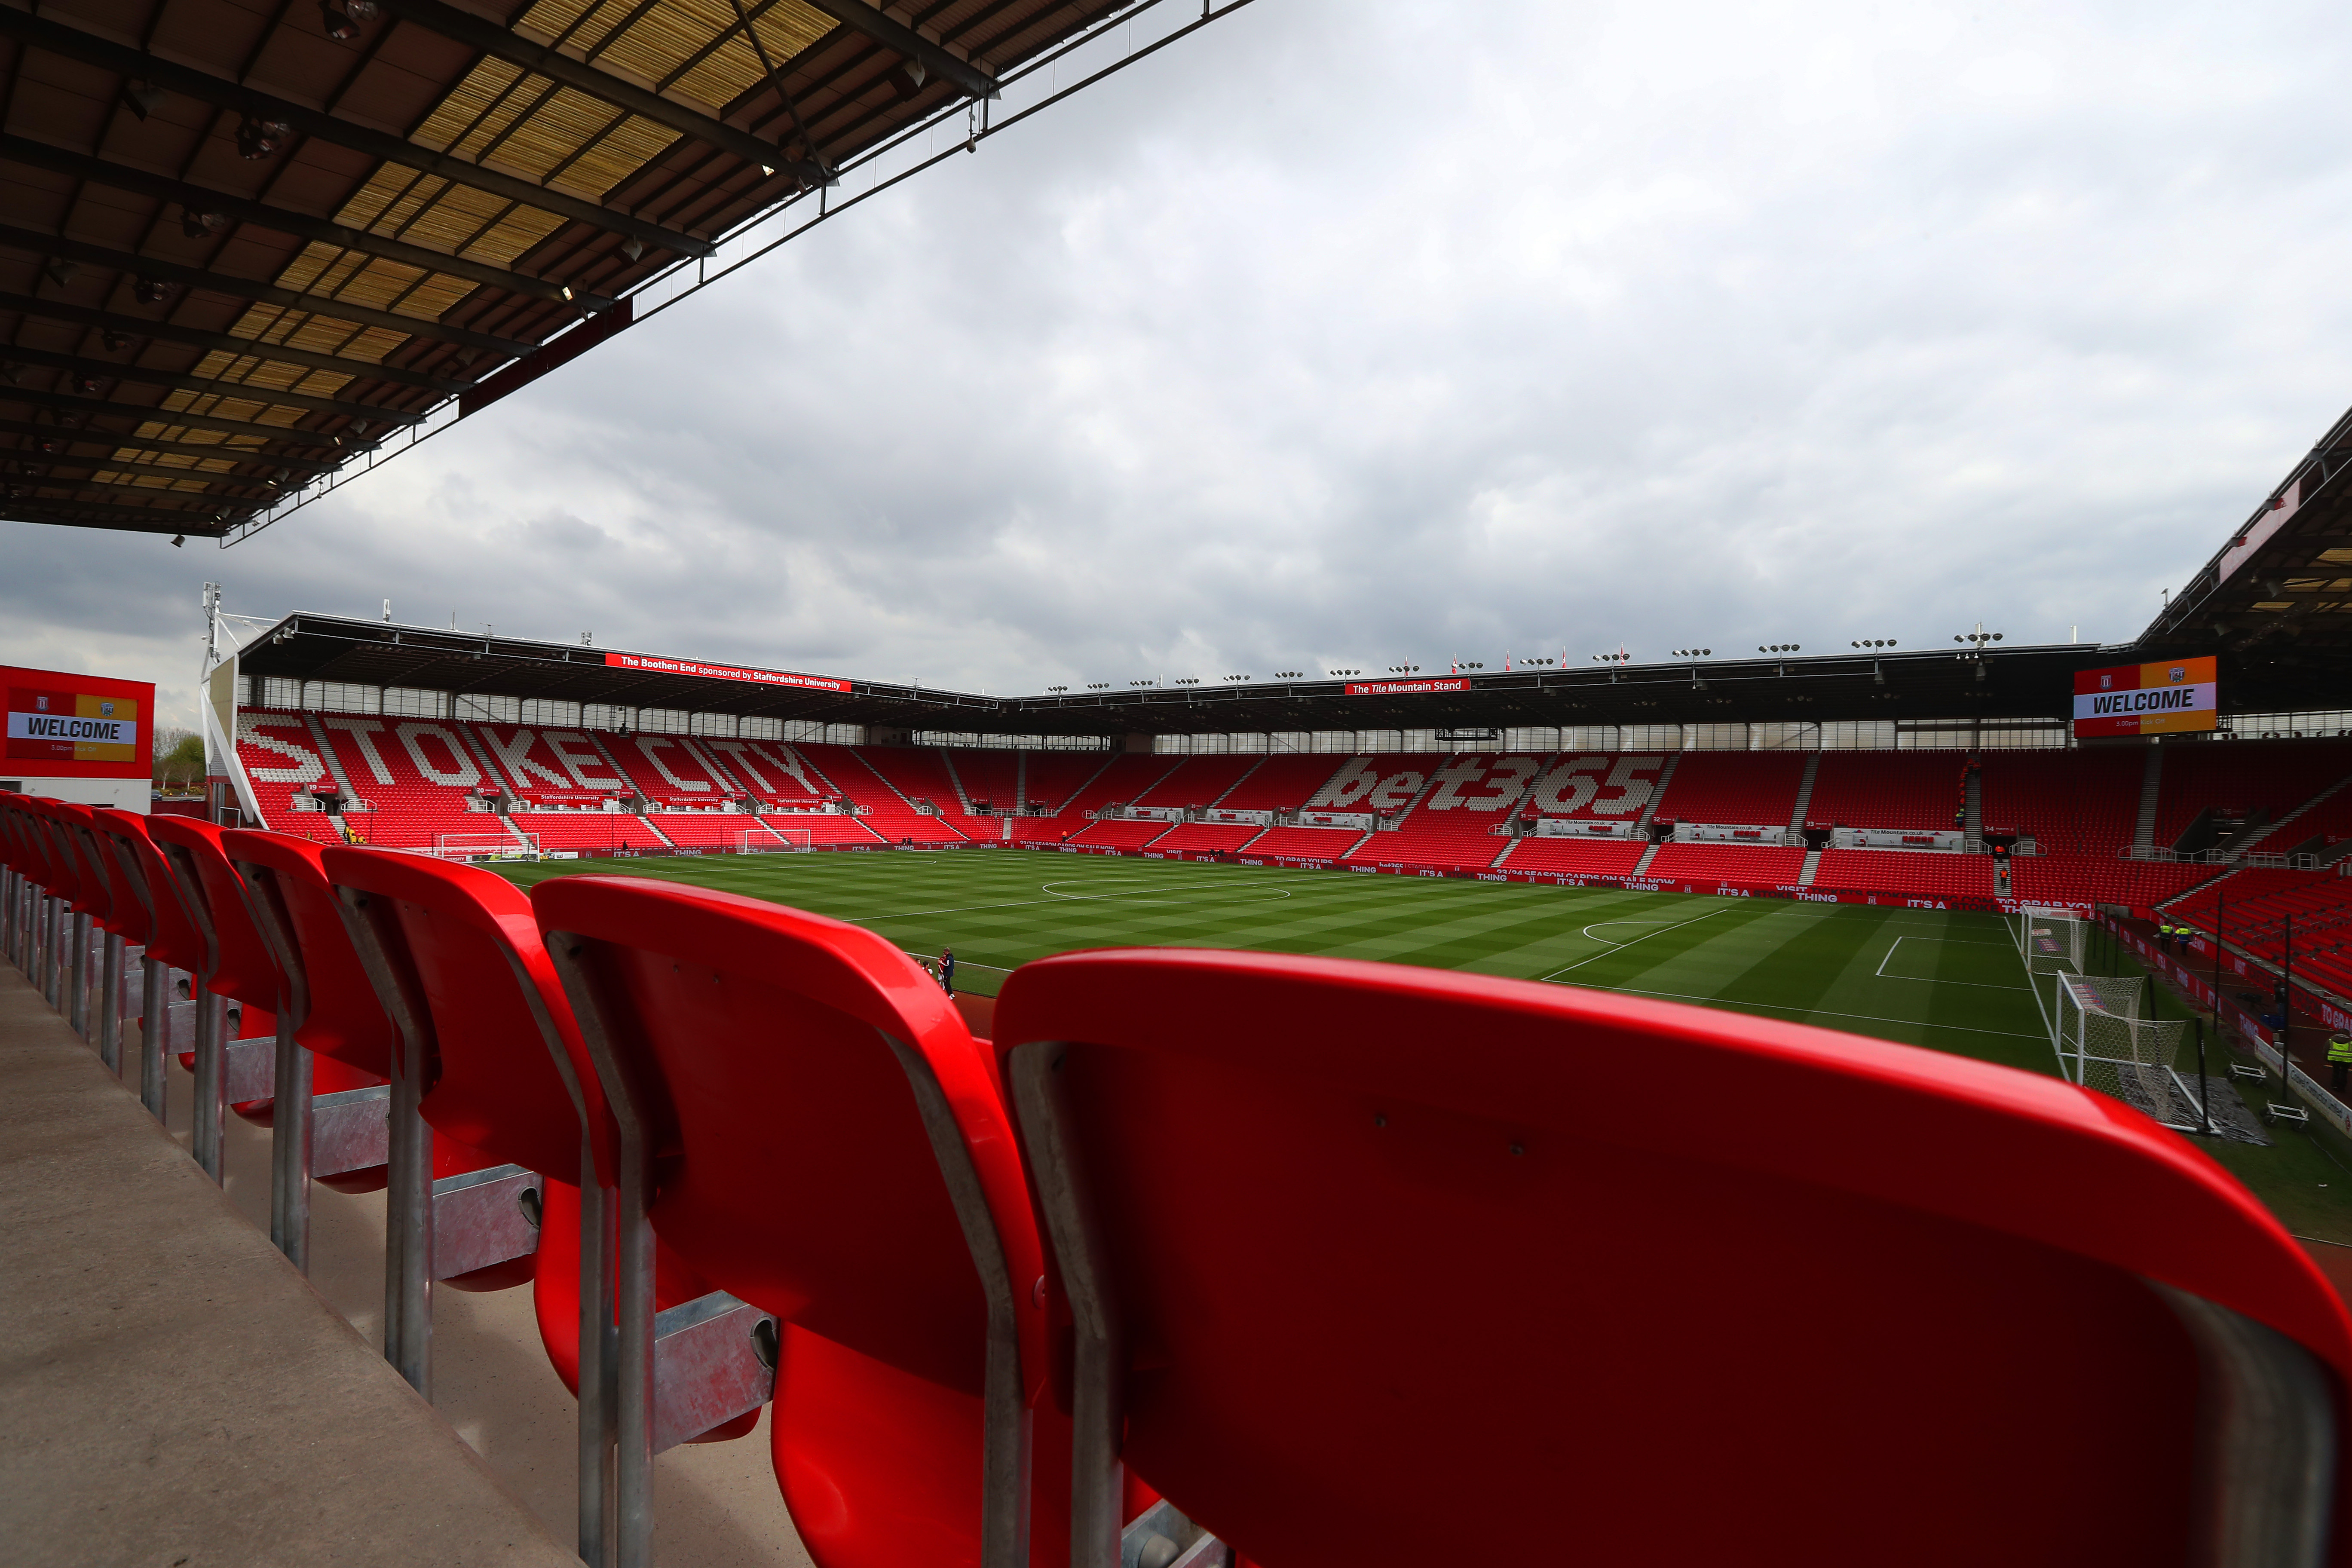 A general view of the bet365 Stadium from the main stand looking across the pitch